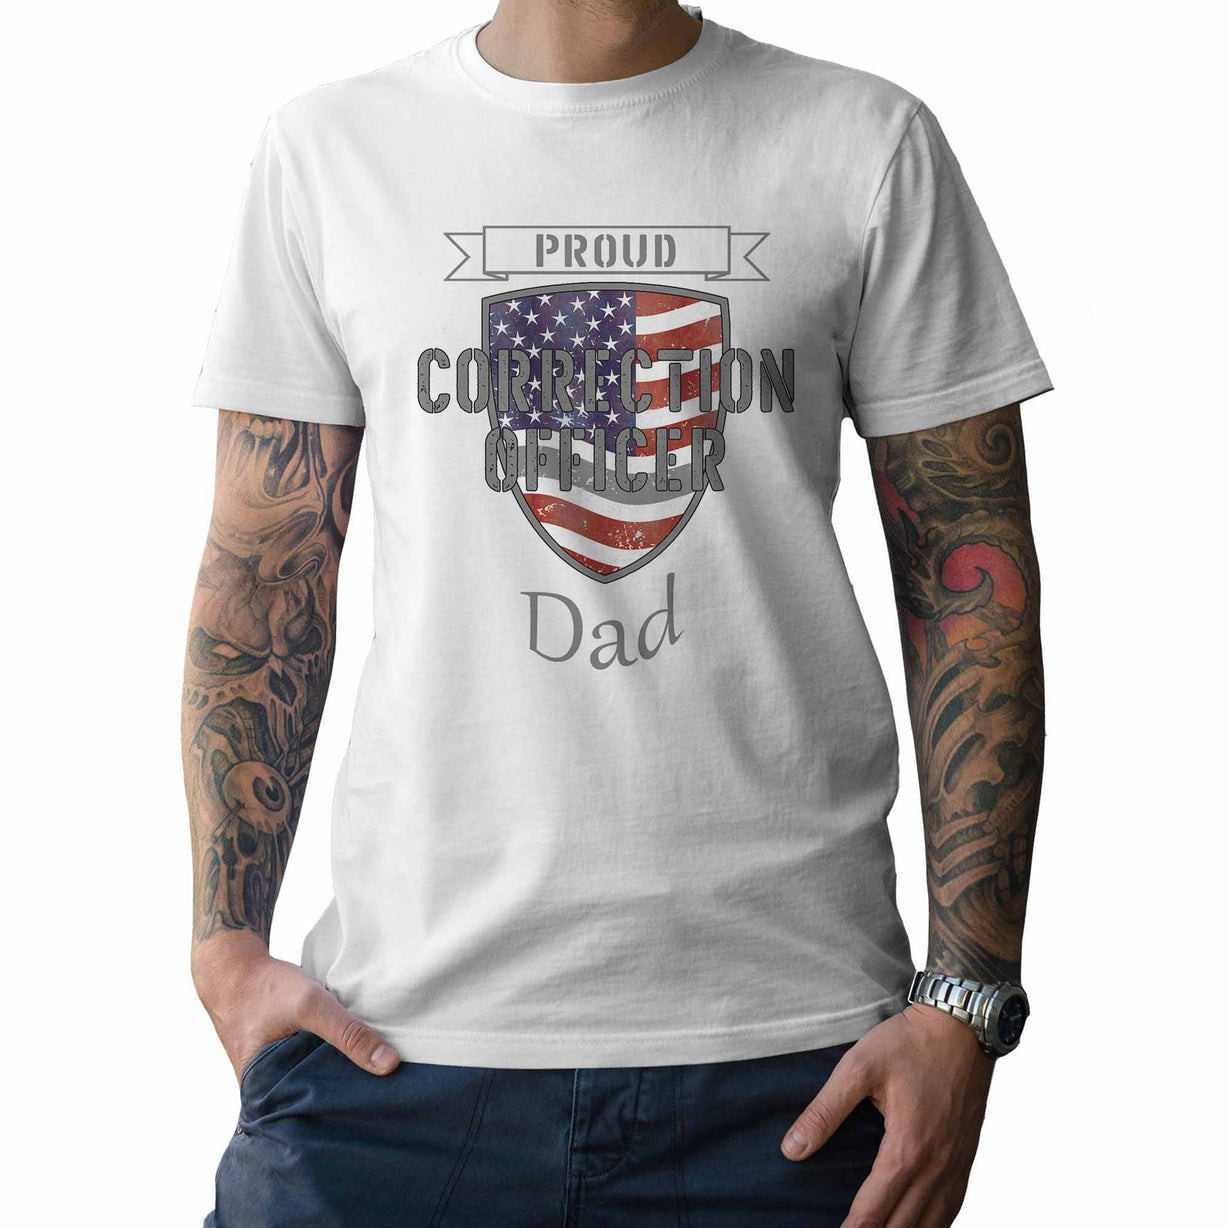 Proud Correction Officer Dad - My Custom Tee Party